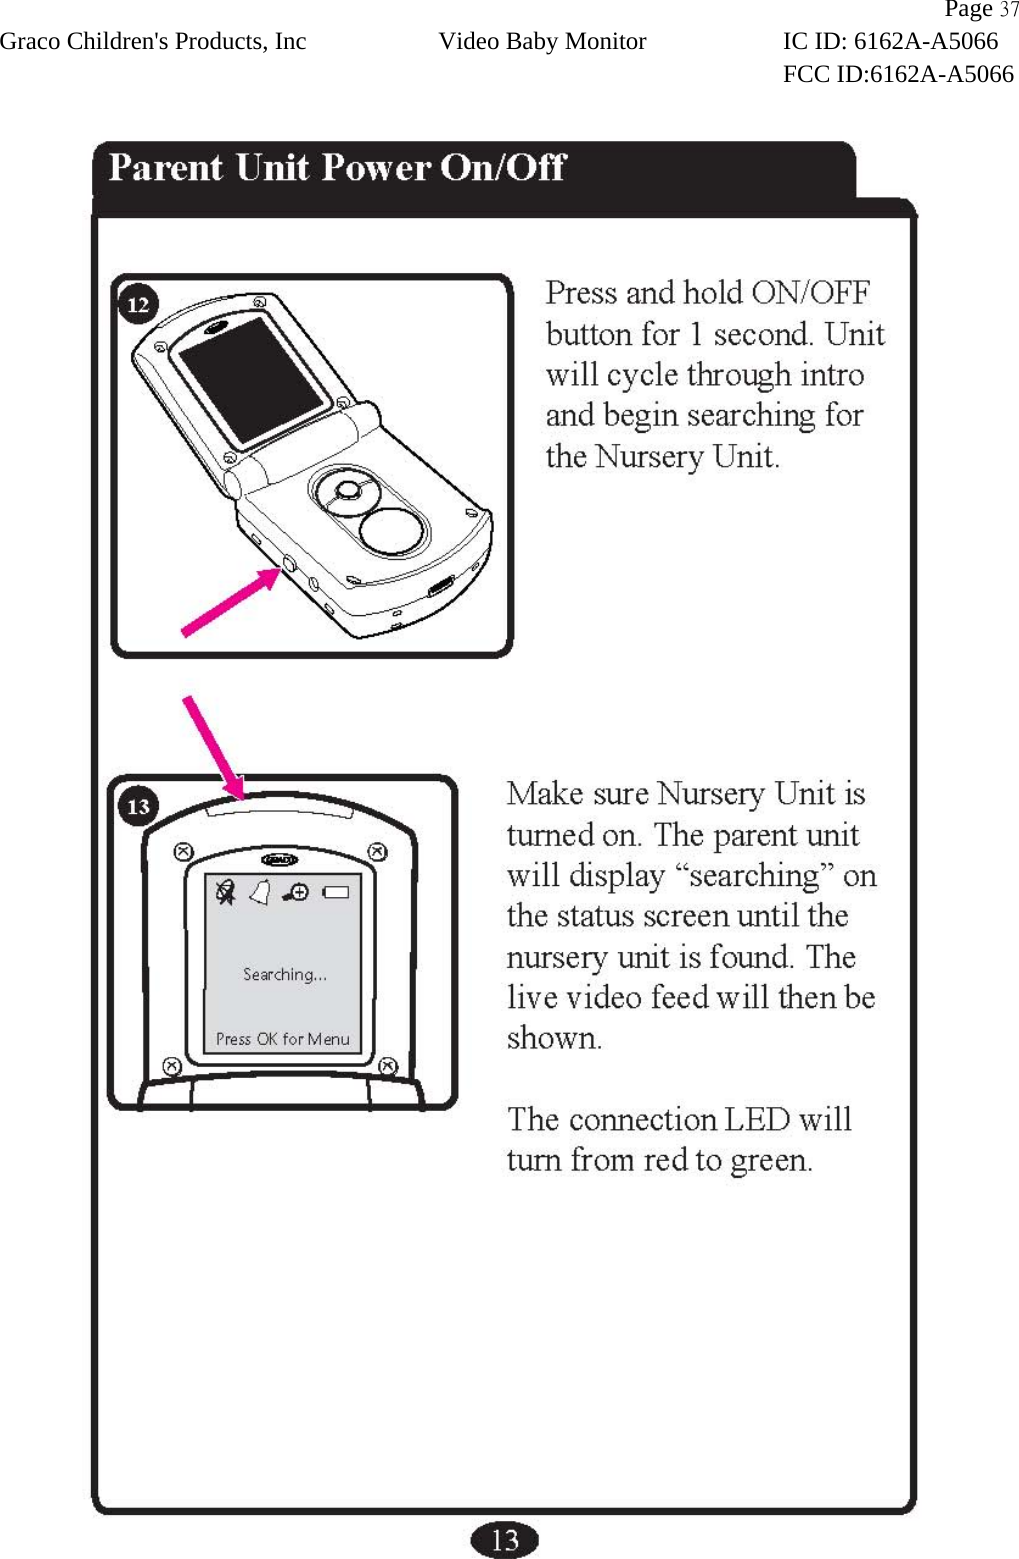                Page 37 Graco Children&apos;s Products, Inc Video Baby Monitor IC ID: 6162A-A5066 FCC ID:6162A-A5066    